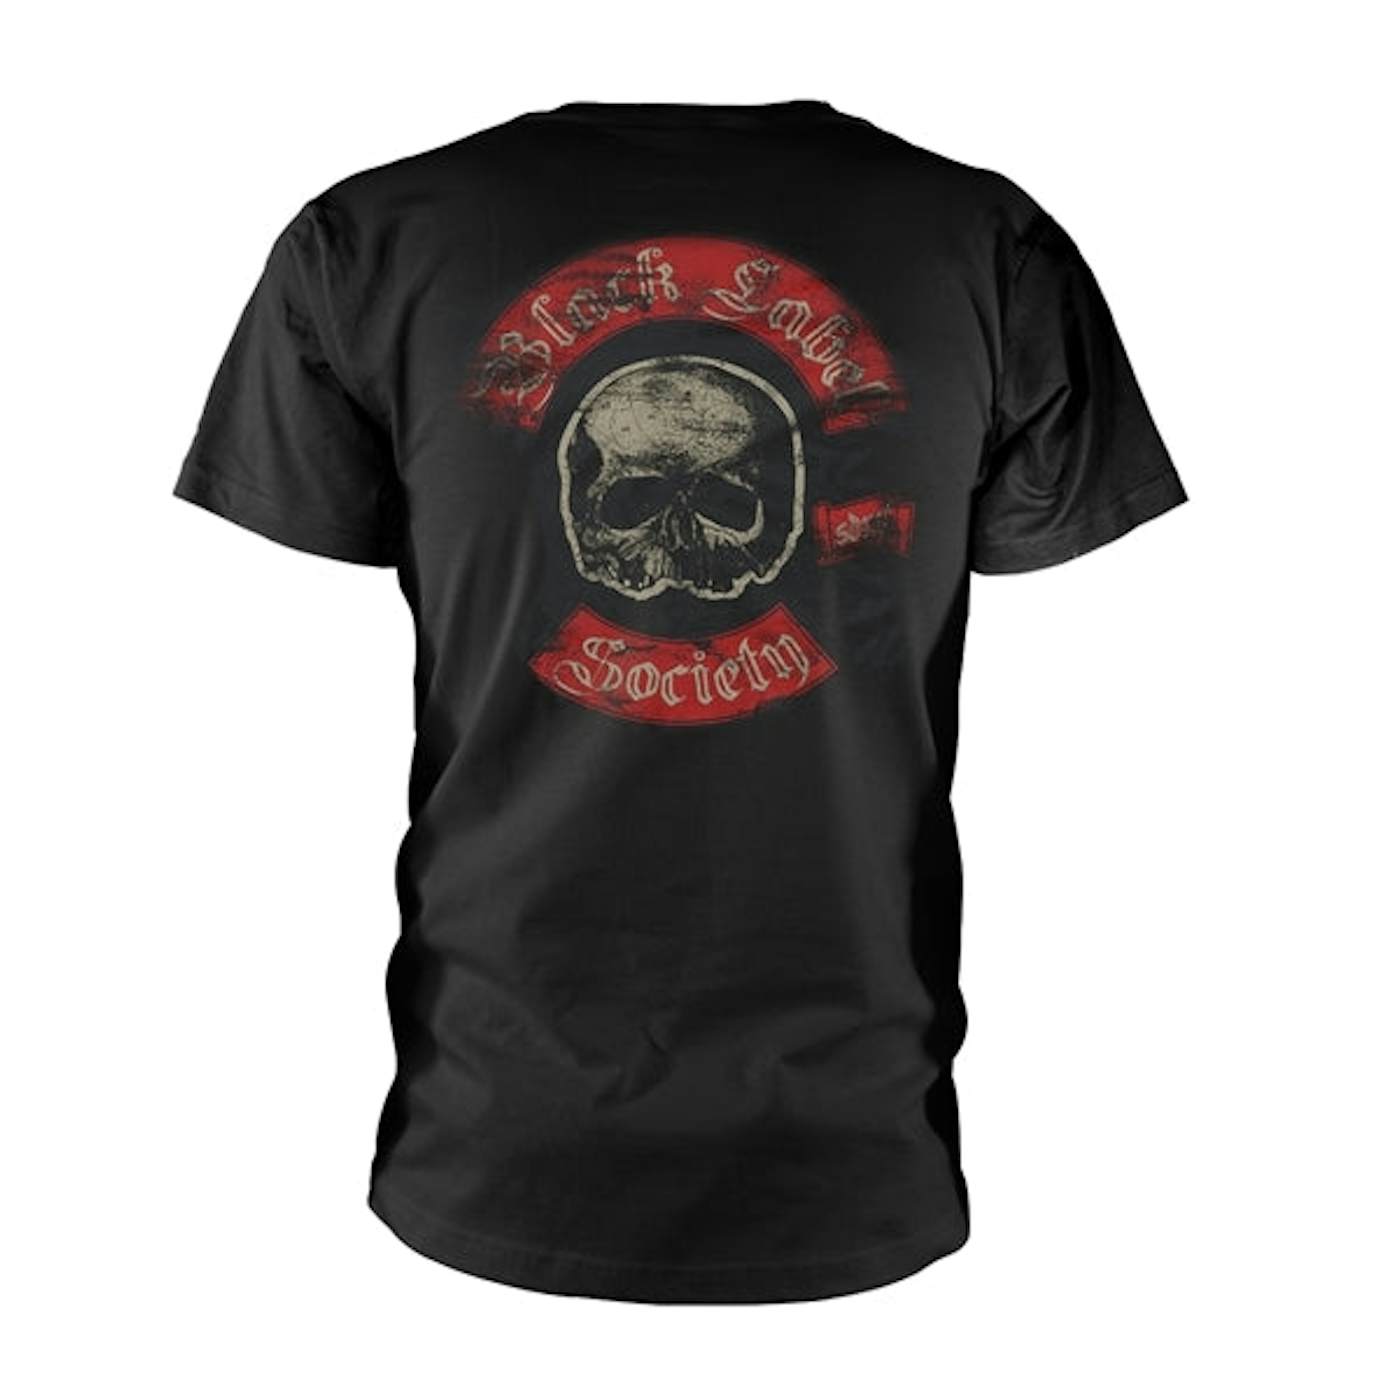 Black Label Society T-Shirt - Destroy & Conquer